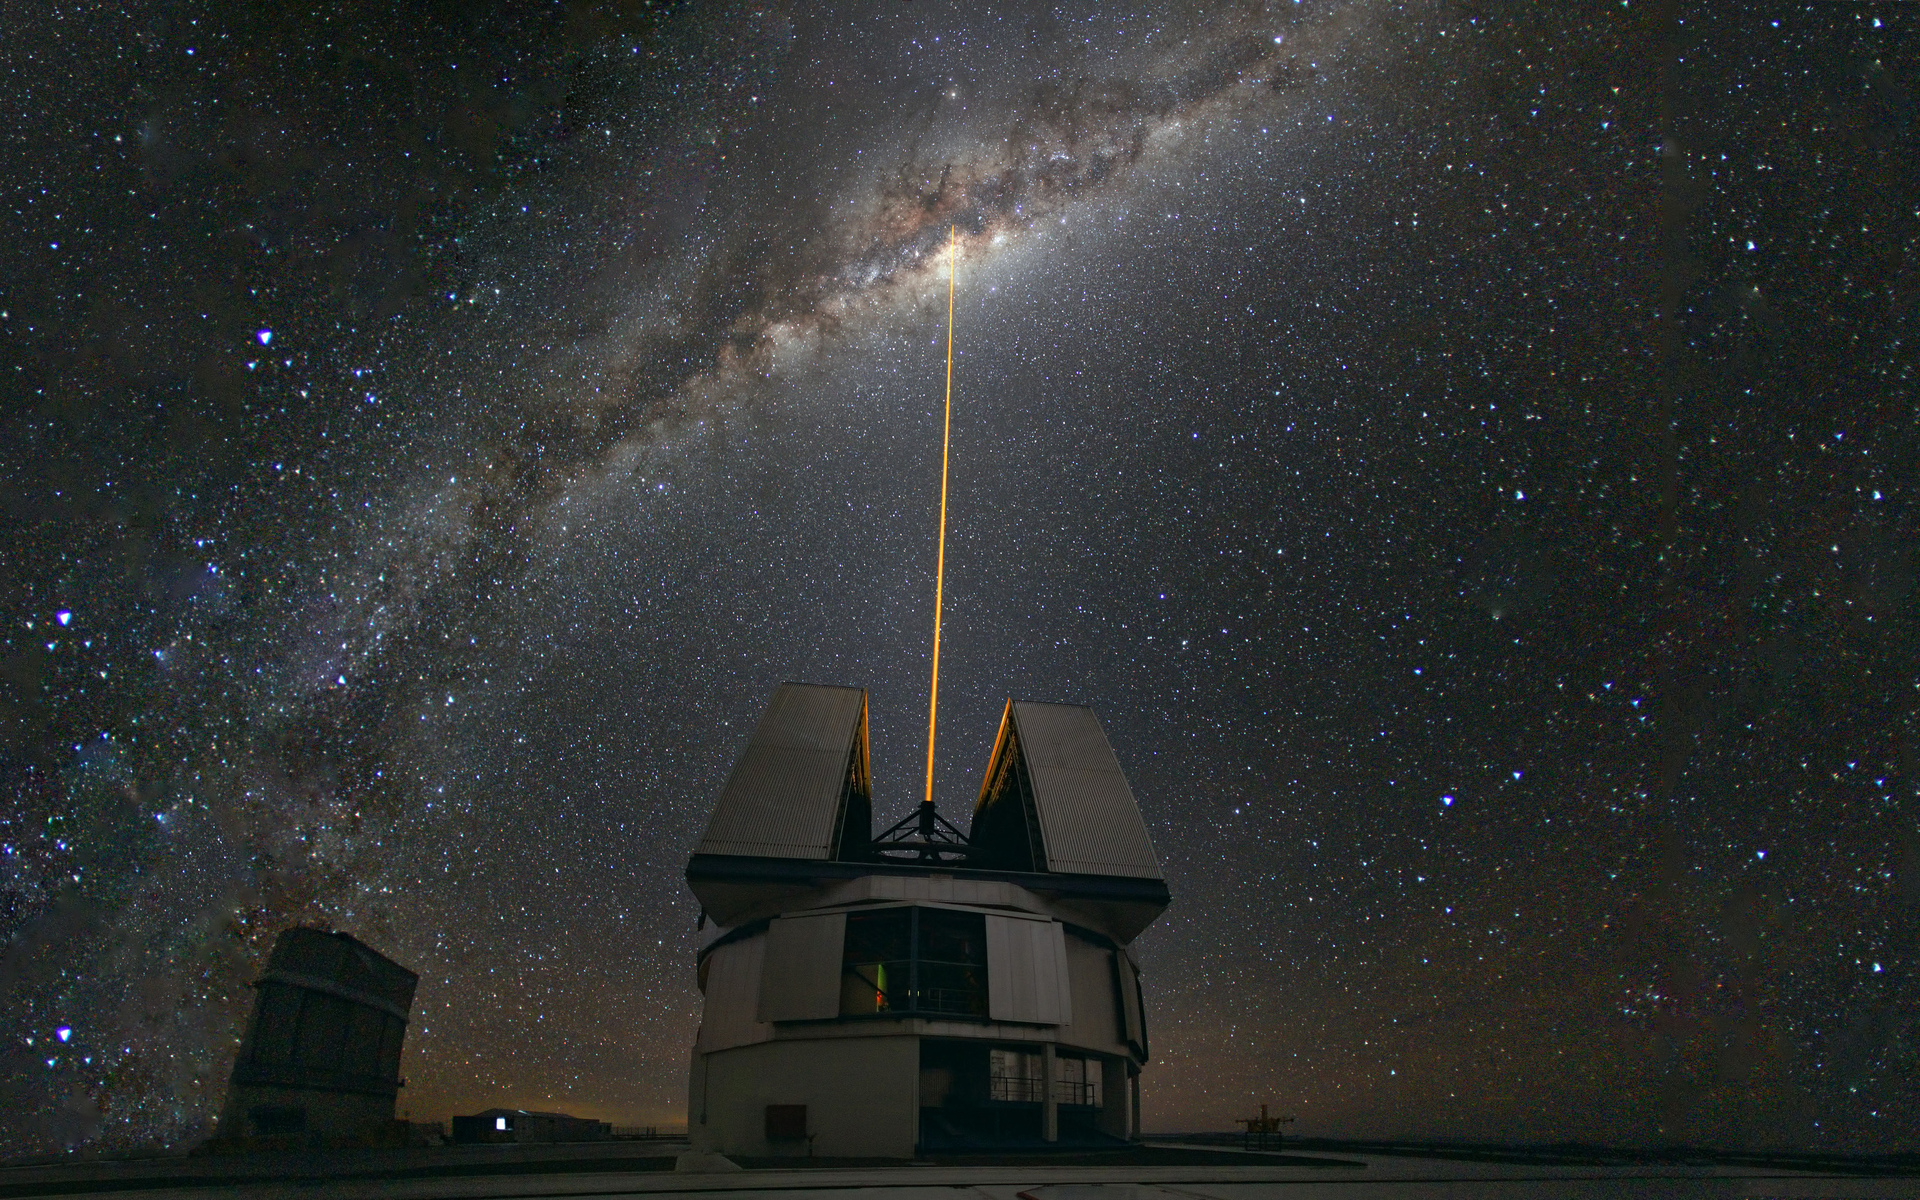 Observatory Milky Way Chile Astronomy Sky Stars Buildings